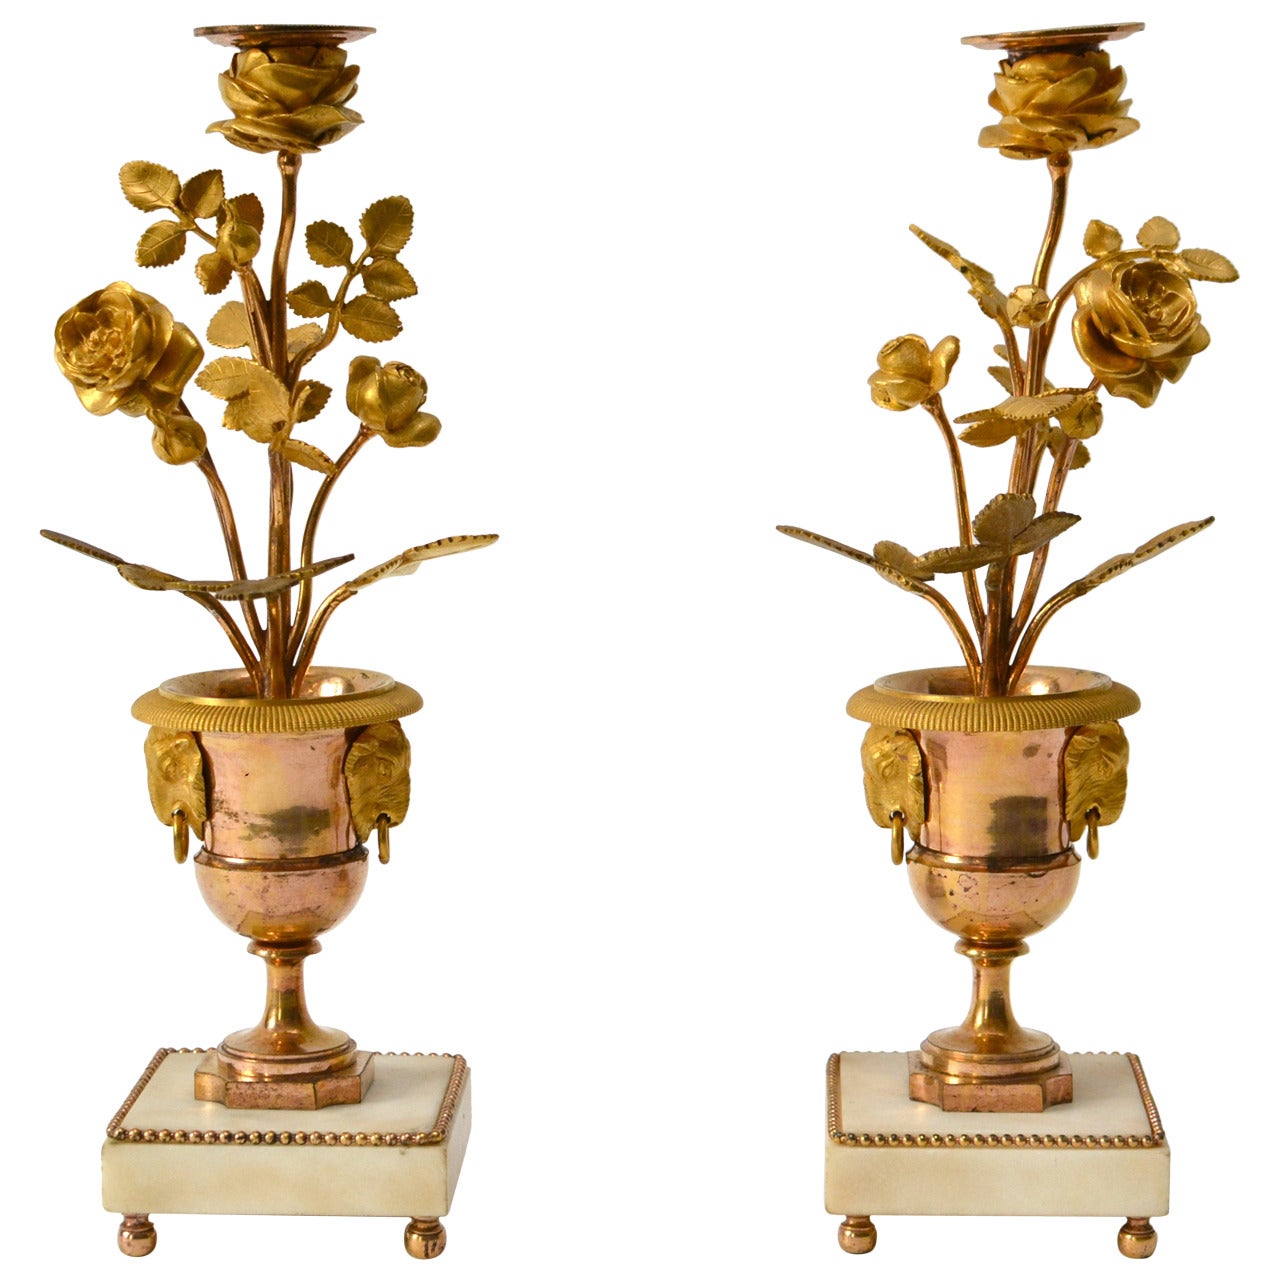 Pair of French Louis XVI Gilt Bronze and White Marble Candlesticks